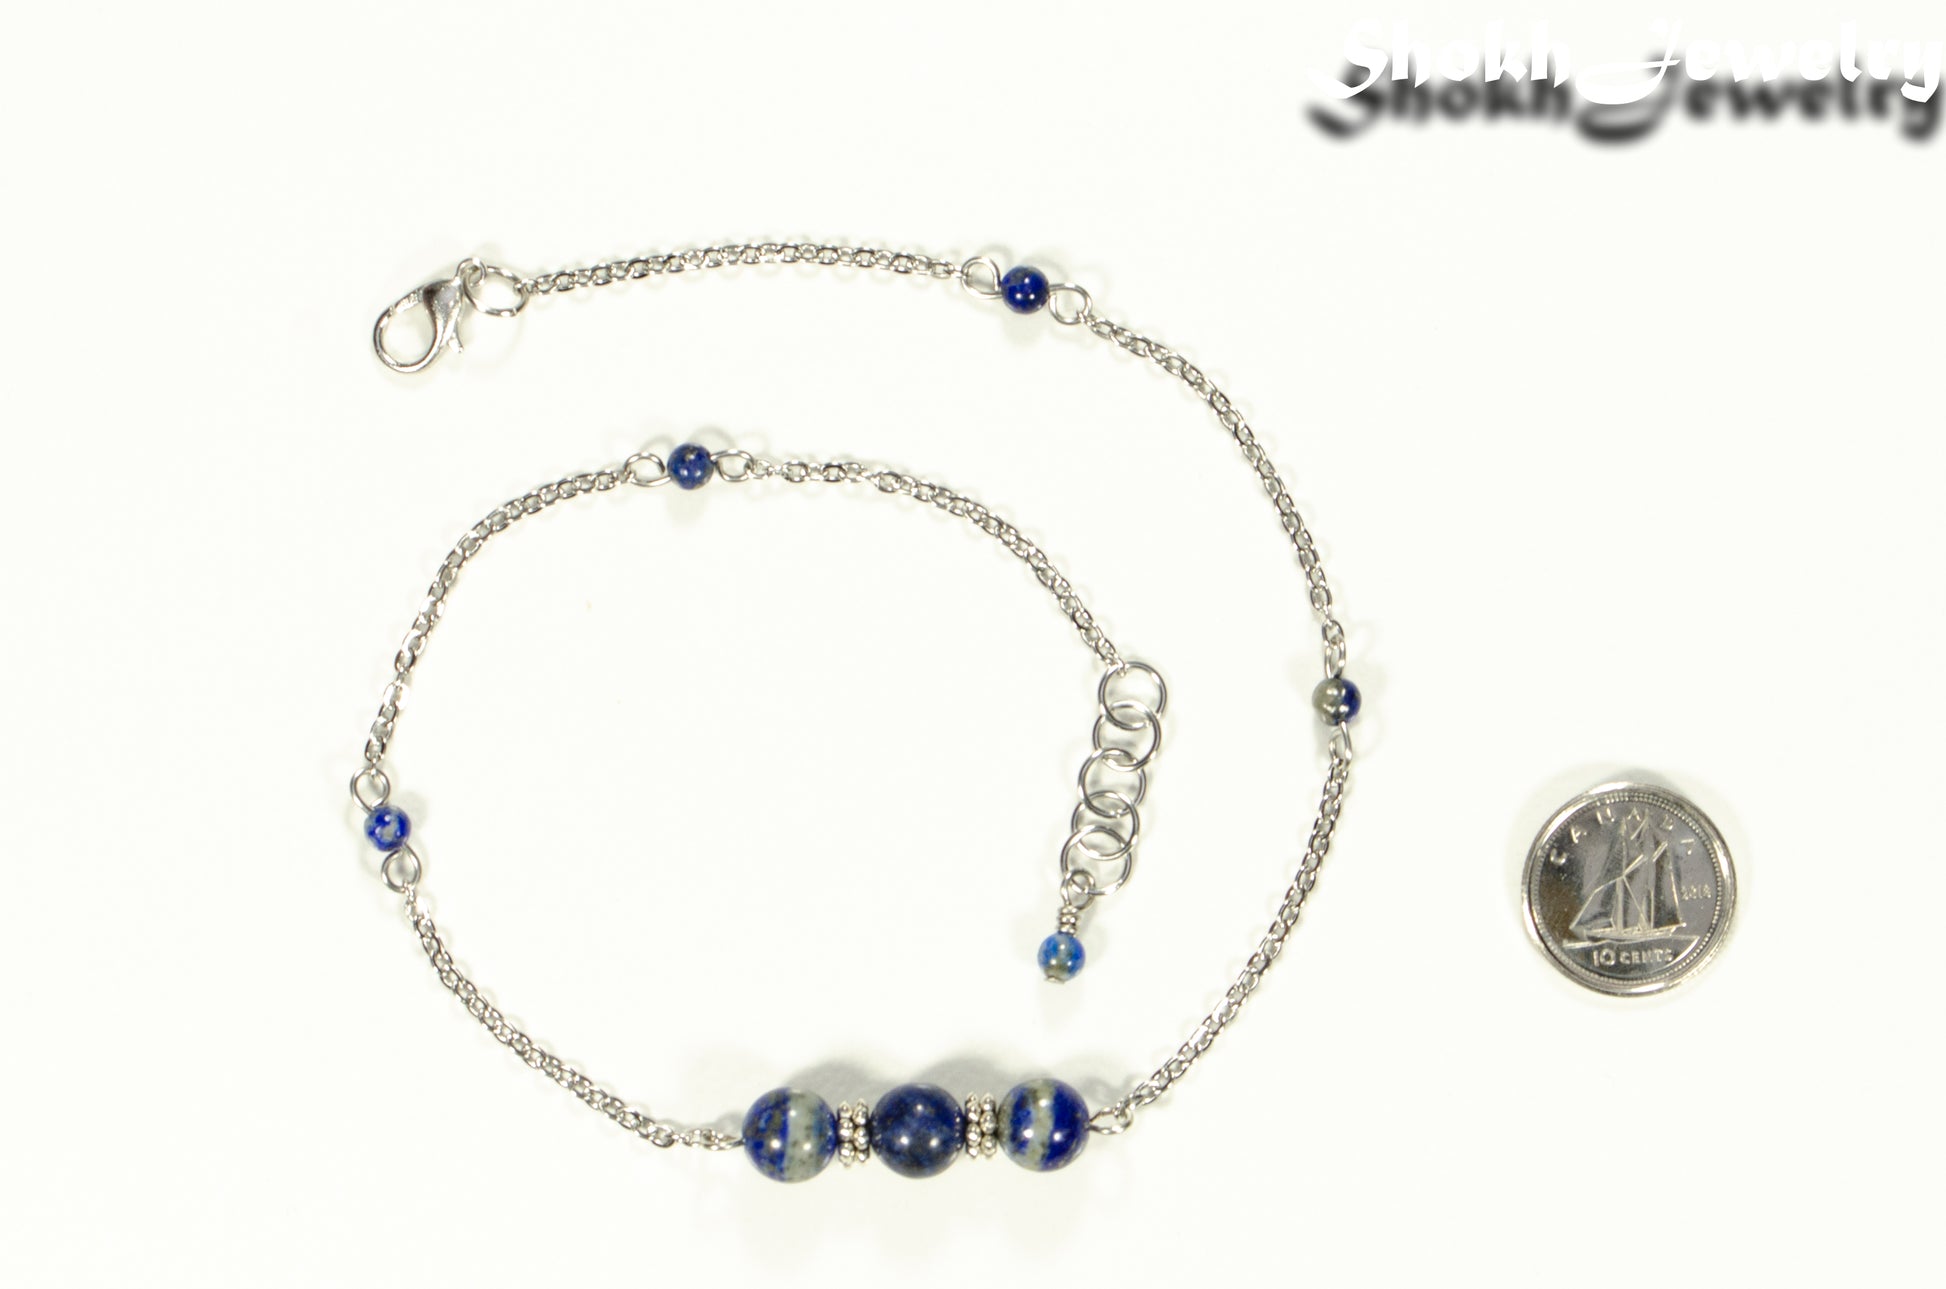 Natural Lapis Lazuli and Chain Choker Necklace beside a dime.